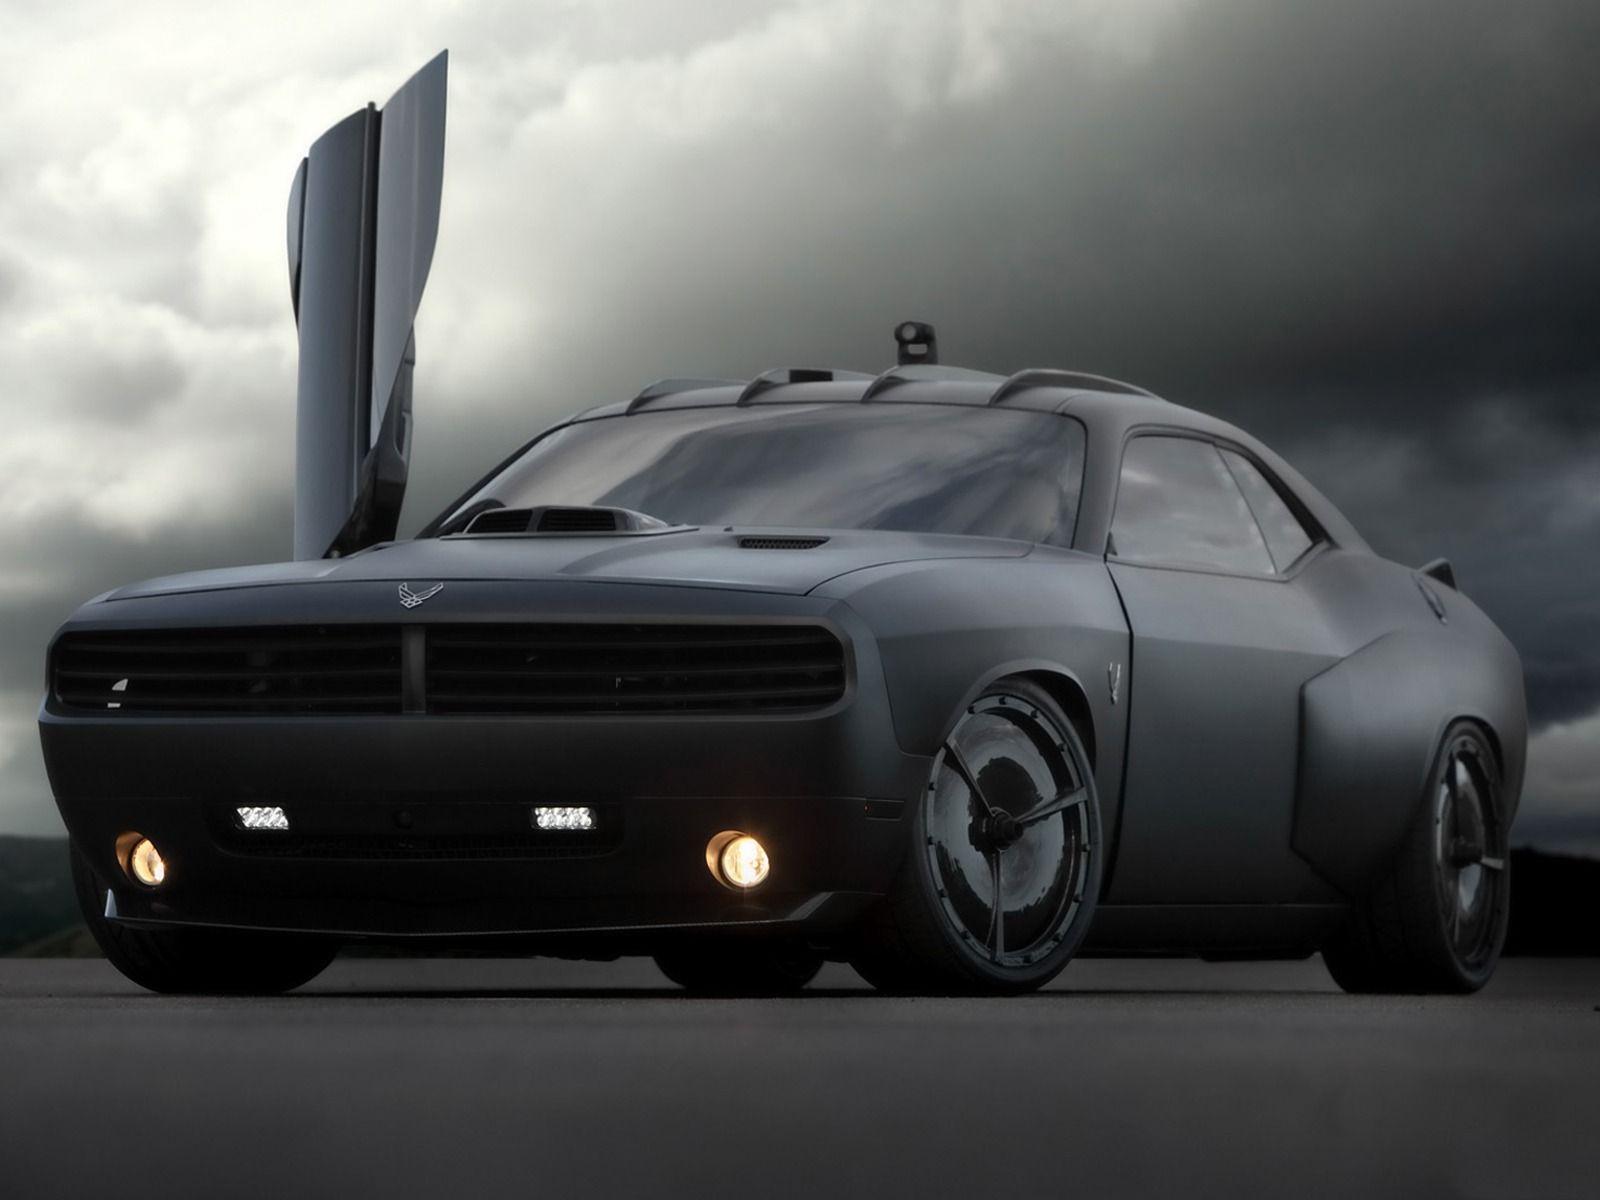 Challenger Wallpaper iPhone HD Wallpaper Picture. Top Vehicle Photo